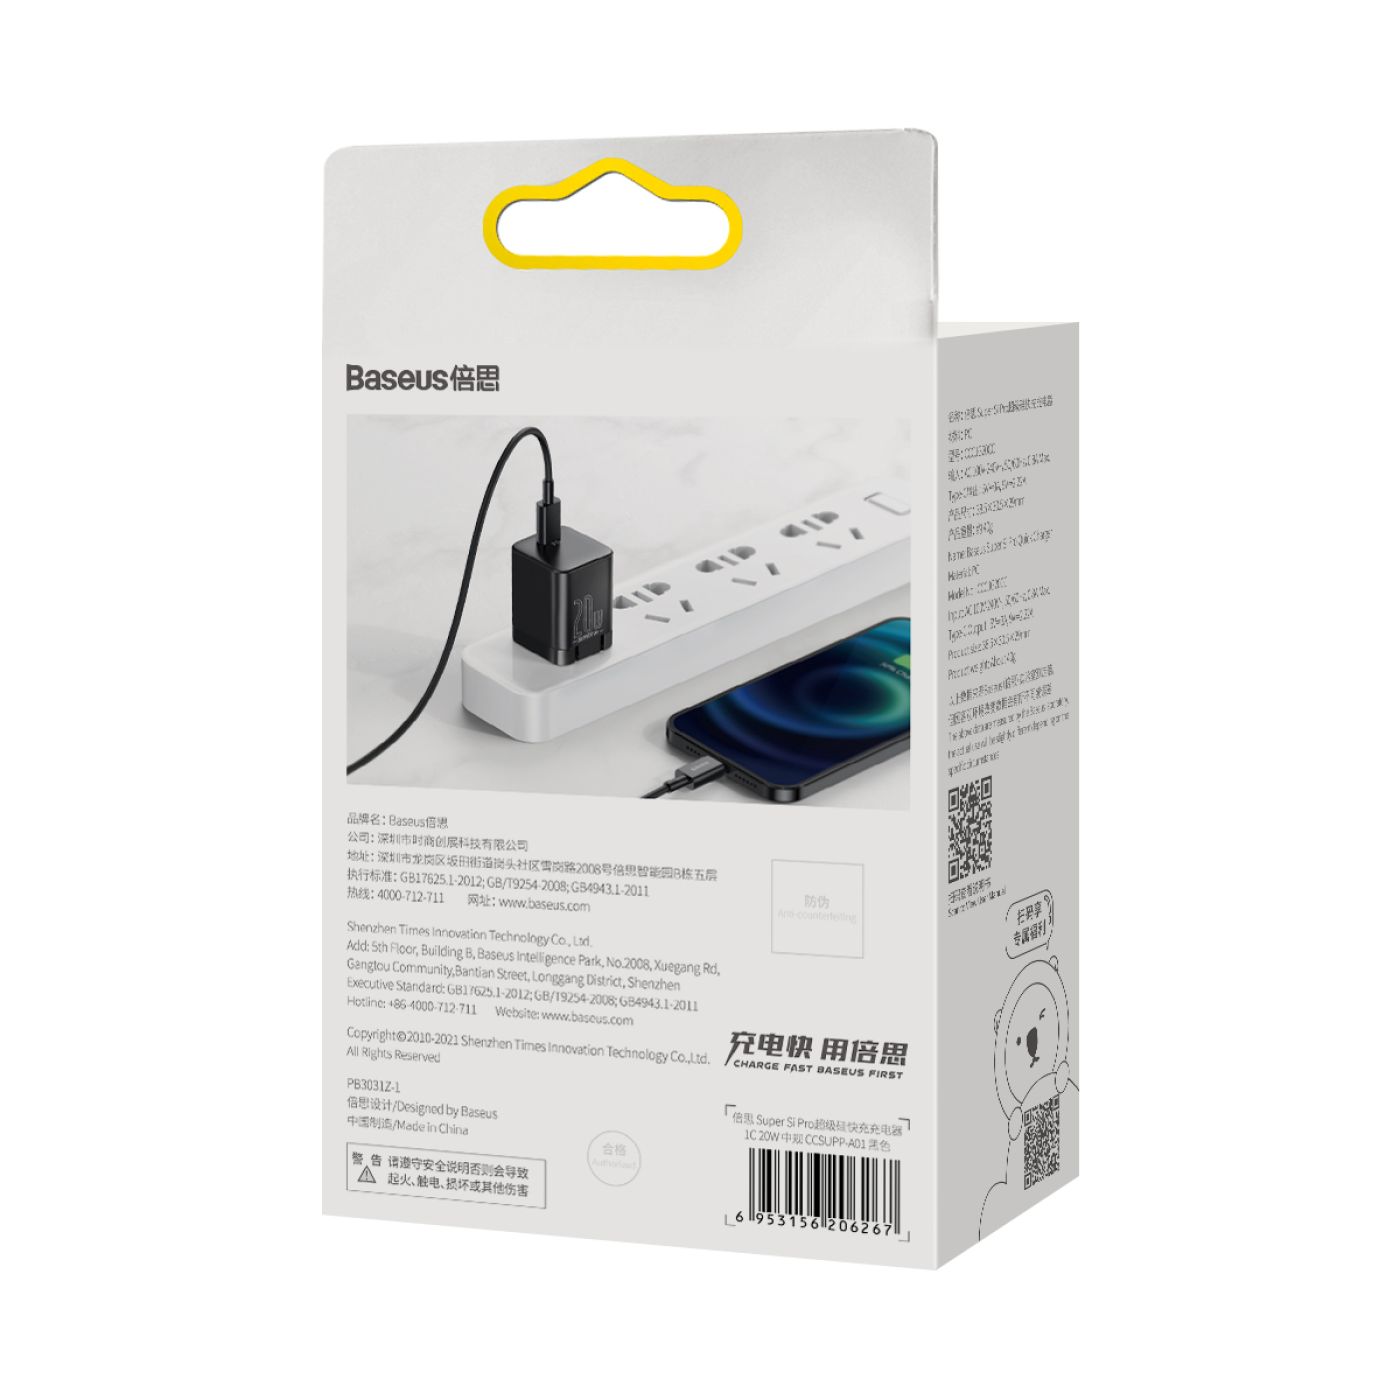 Củ sạc nhanh nhỏ gọn Baseus Super Si Pro Quick Charger 1C 20W (PD/QC/PPS/SCP/FCP Multi Quick Charge)